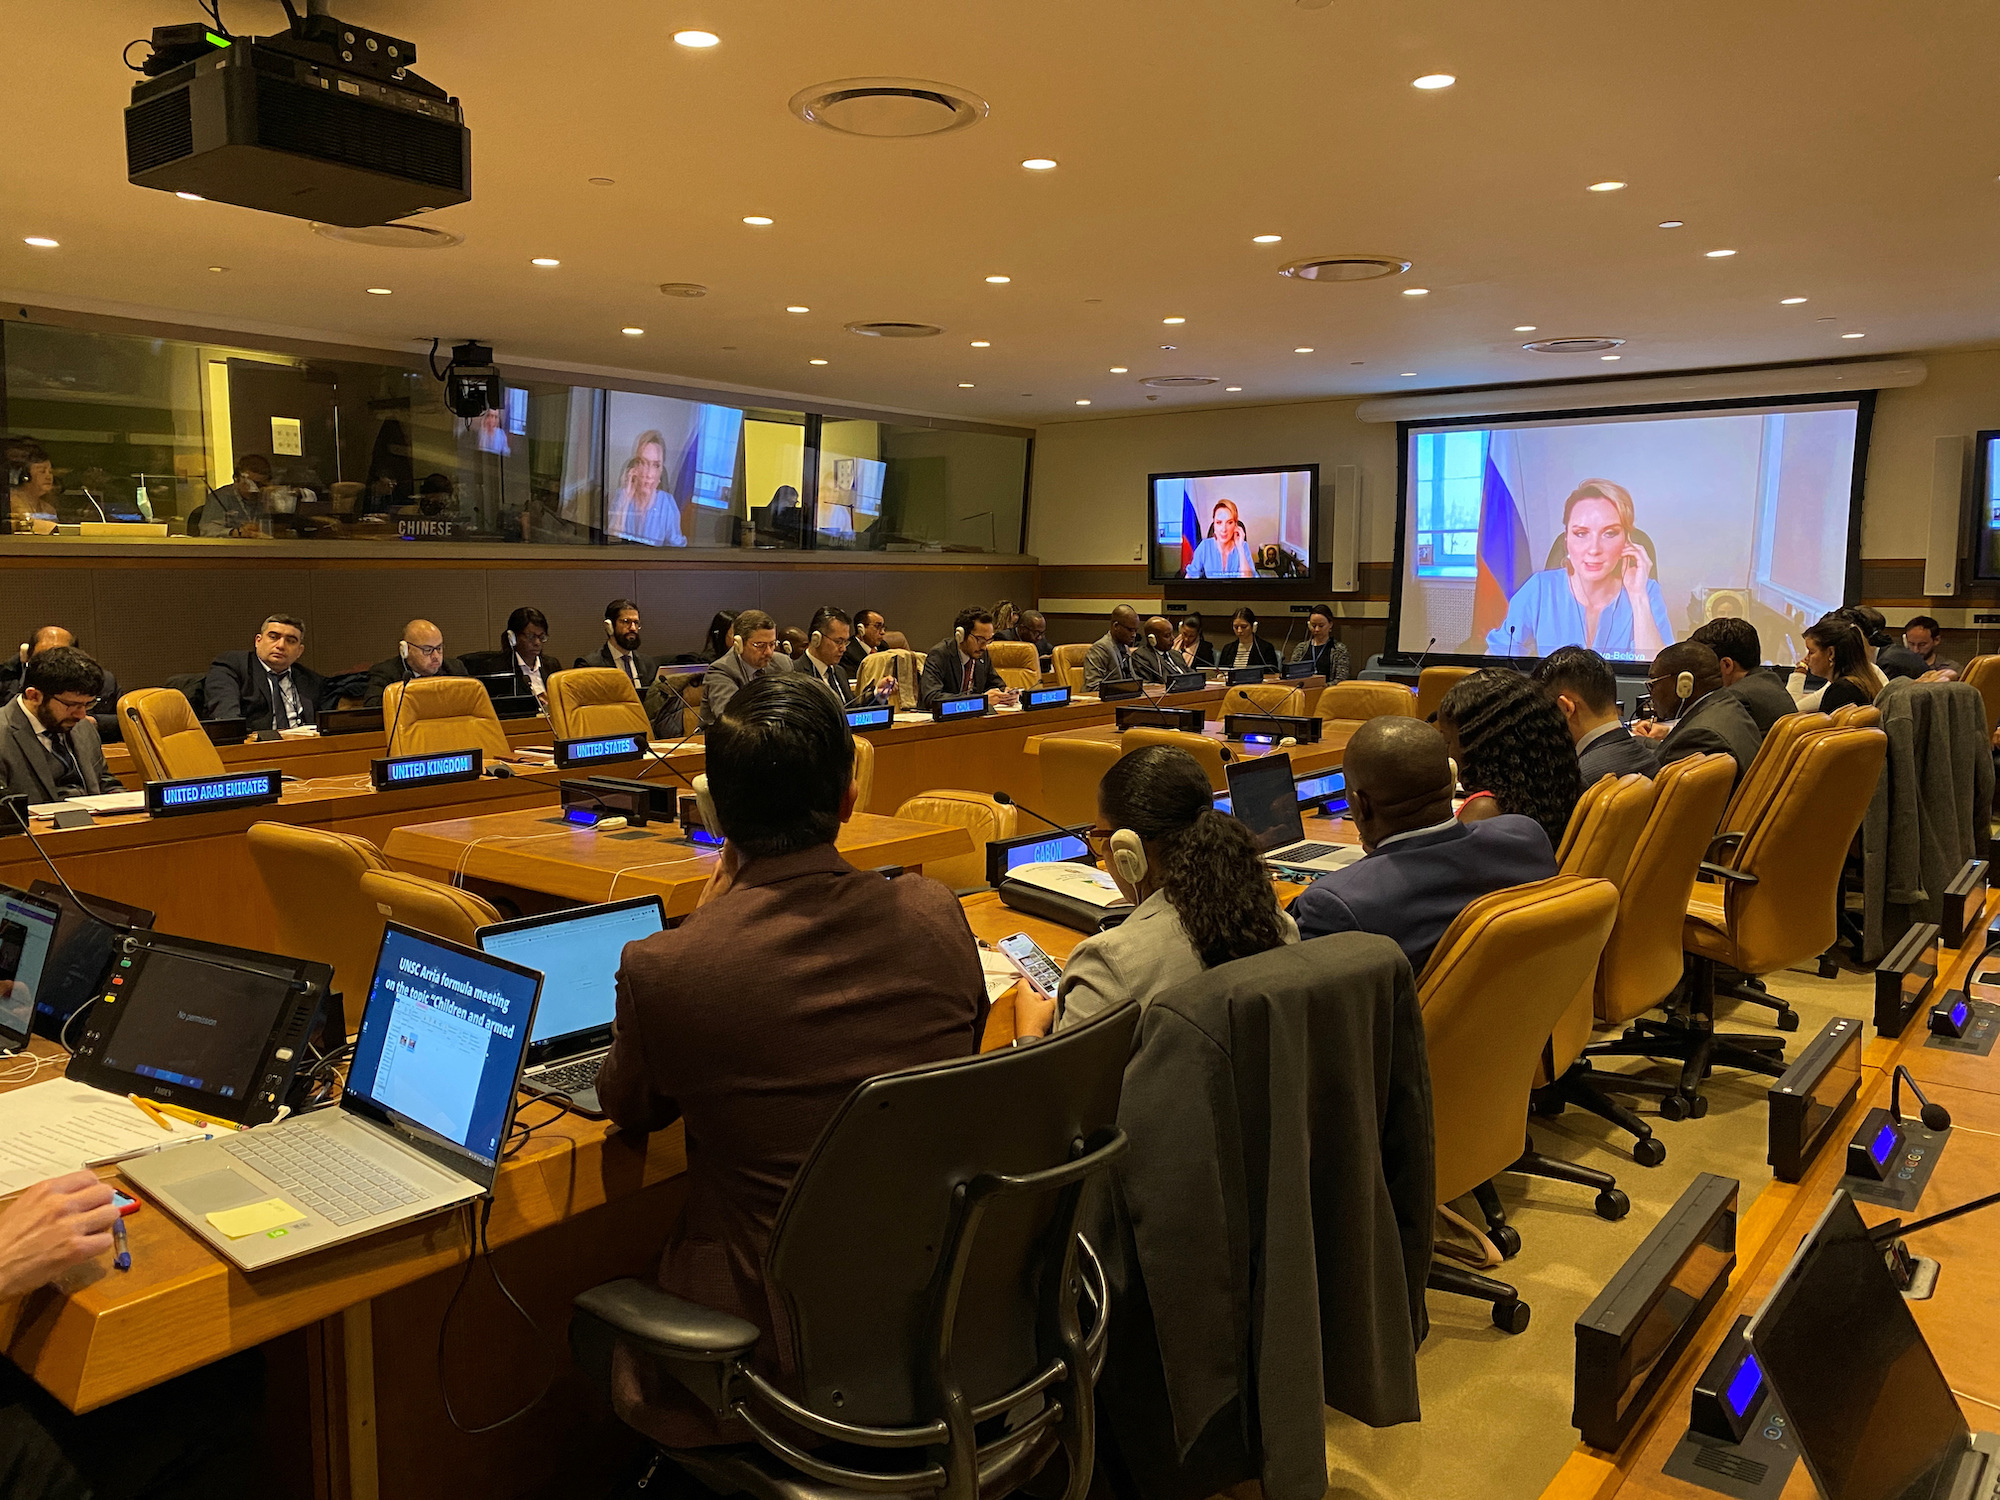 Russia's Commissioner for children's rights Maria Lvova-Belova addresses an informal meeting of UN Security Council members via video at the UN headquarters in New York City on Wednesday.